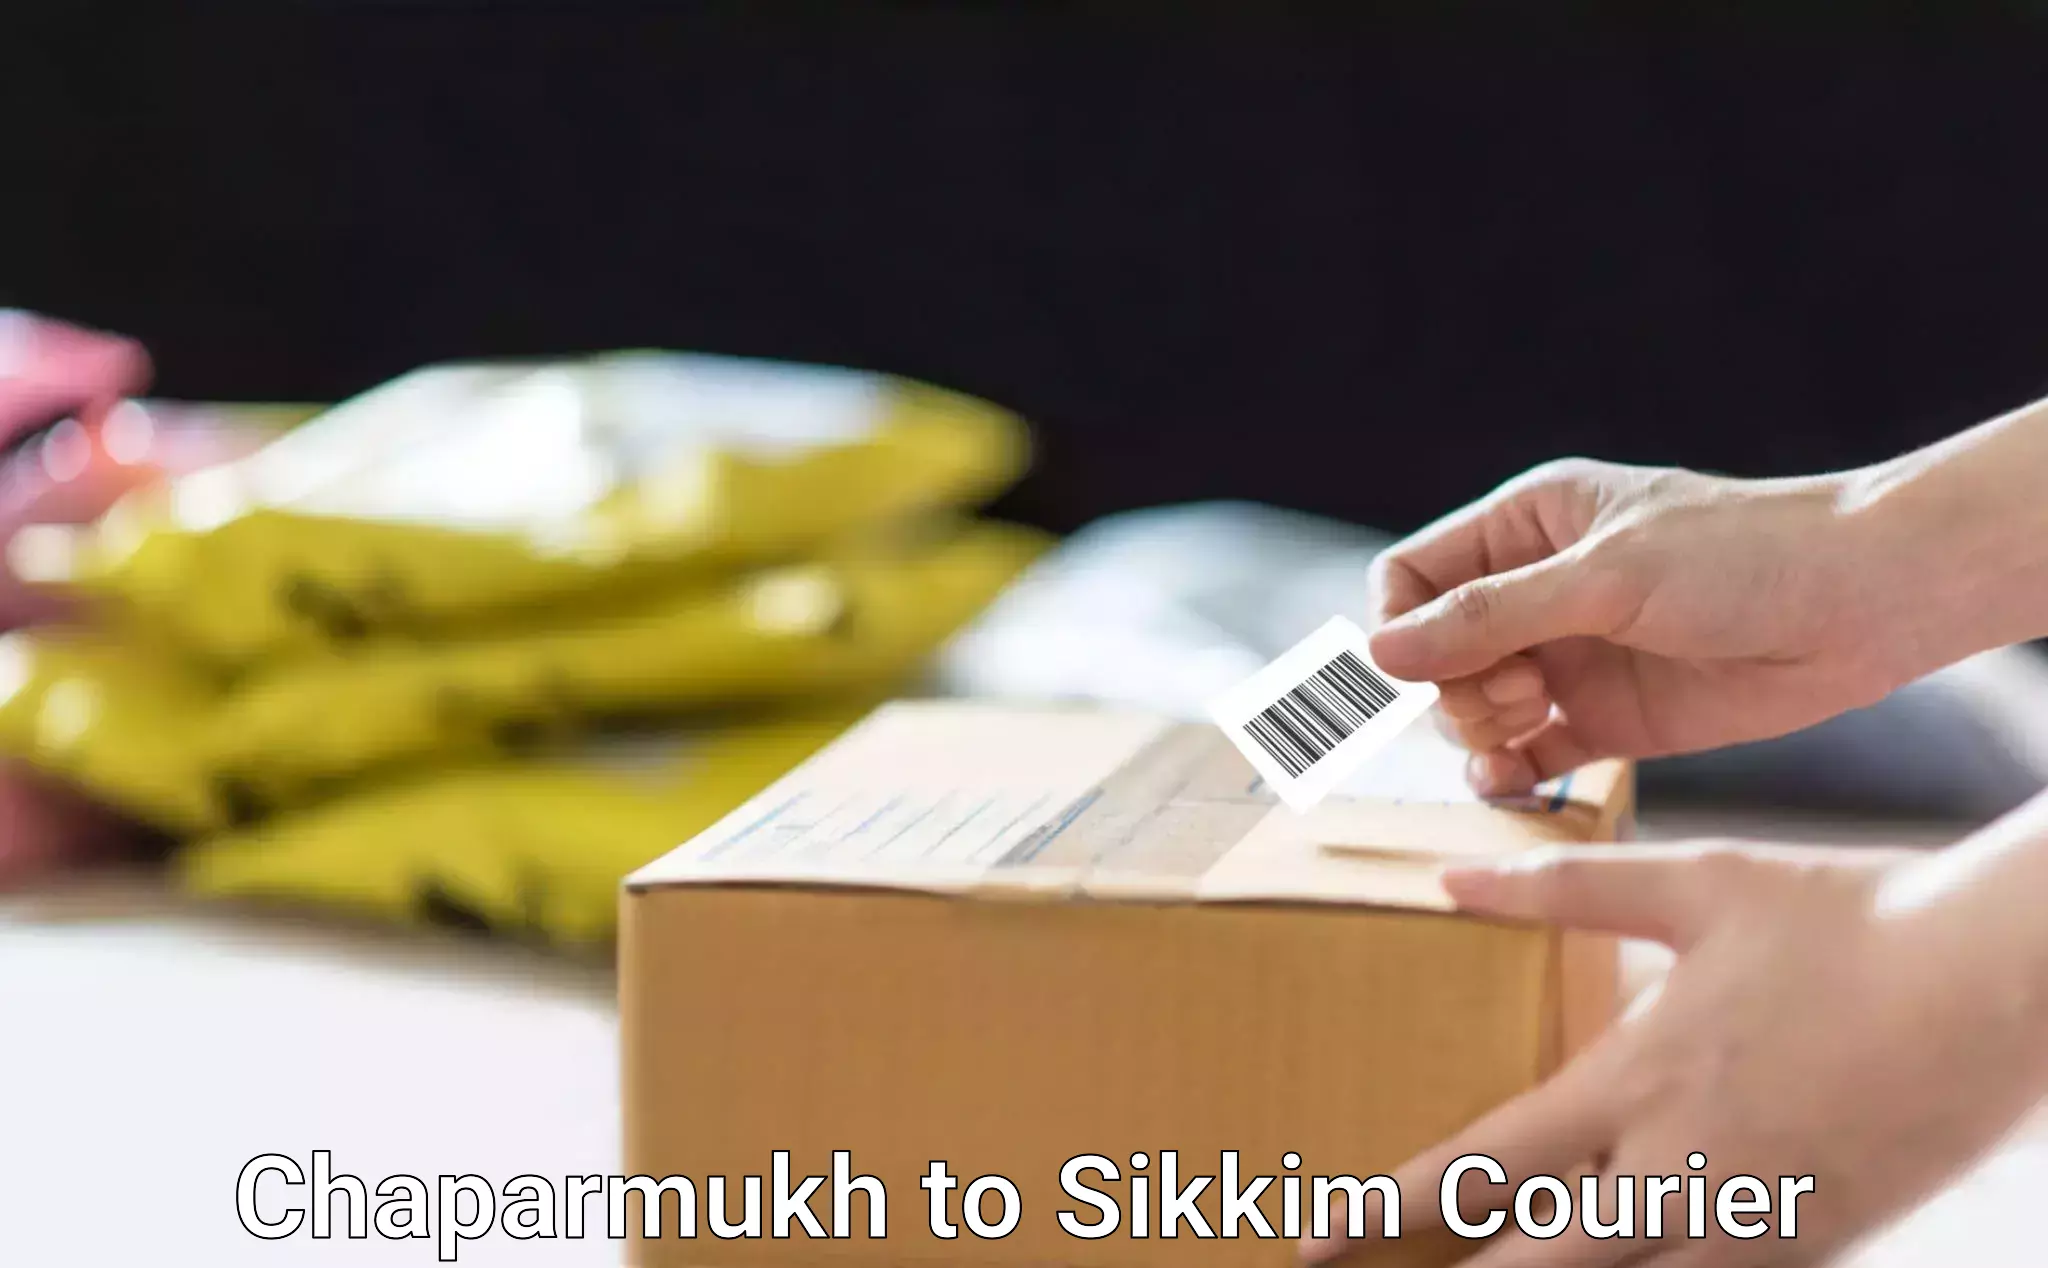 Seamless shipping experience Chaparmukh to Sikkim